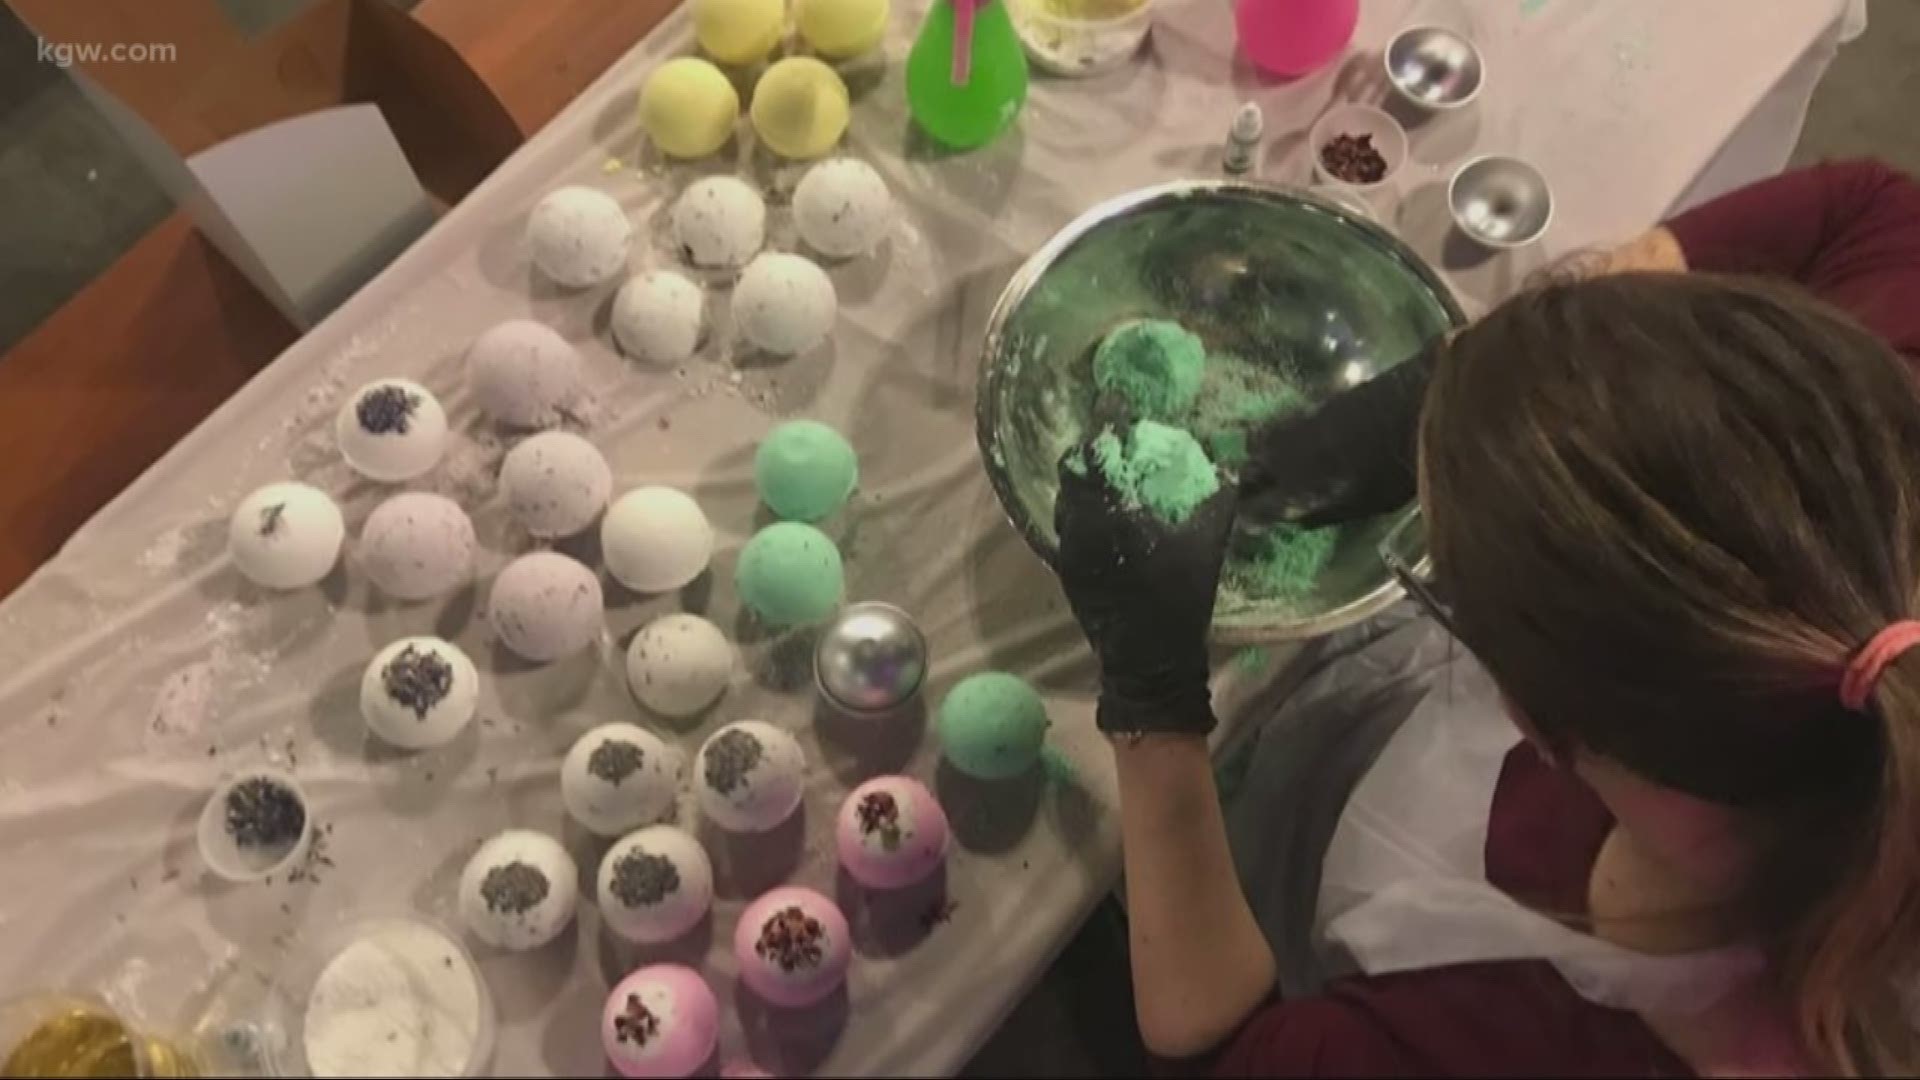 We’re learning how to make our own shower steamers to turn our bathrooms into our own personal spas! 
https://www.latherandfoam.com/bath-bomb-workshops